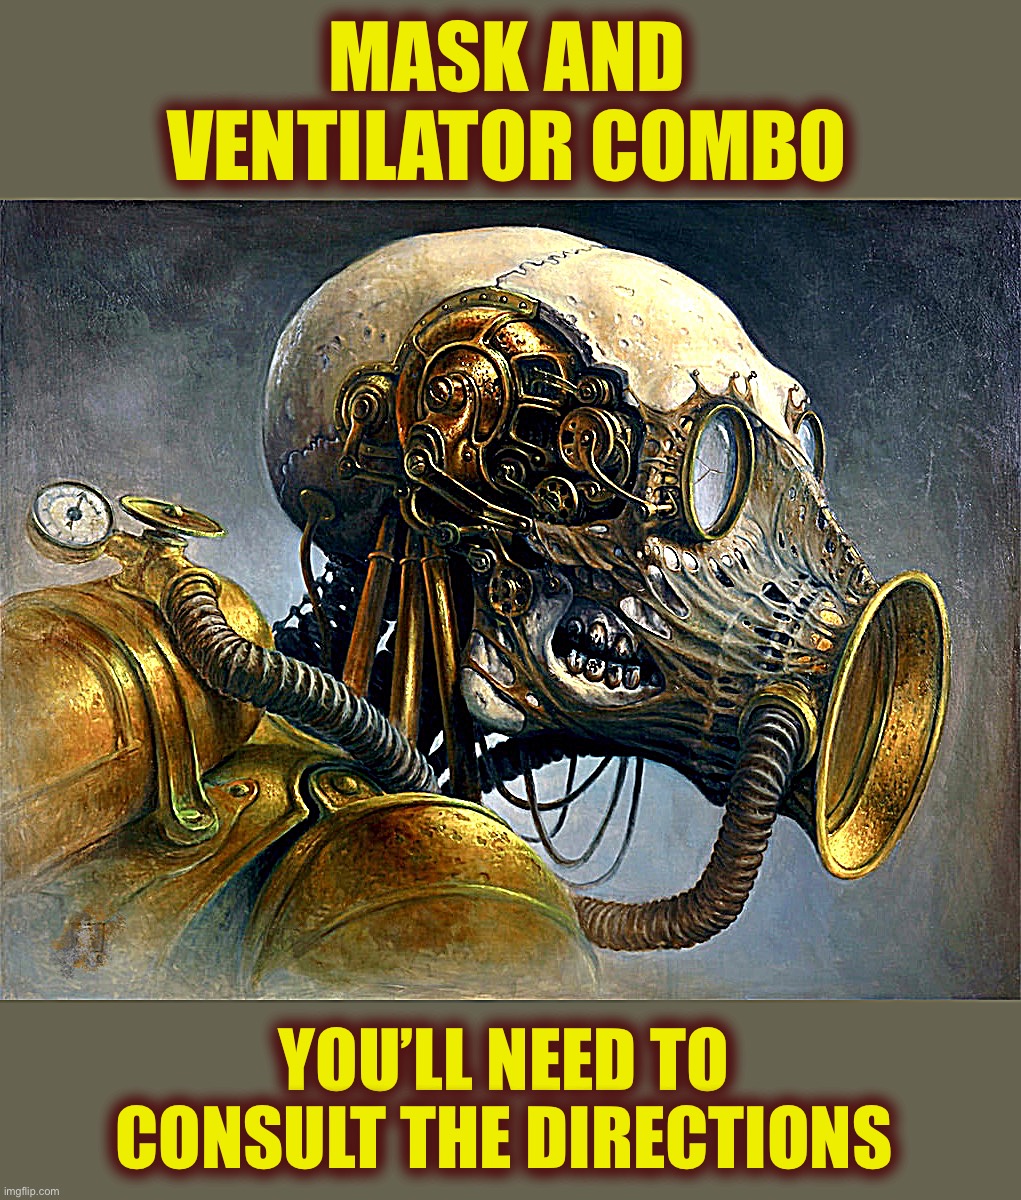 Don’t forget to breathe |  MASK AND VENTILATOR COMBO; YOU’LL NEED TO CONSULT THE DIRECTIONS | image tagged in coronavirus,mask,gas mask,steampunk,pandemic,strange | made w/ Imgflip meme maker